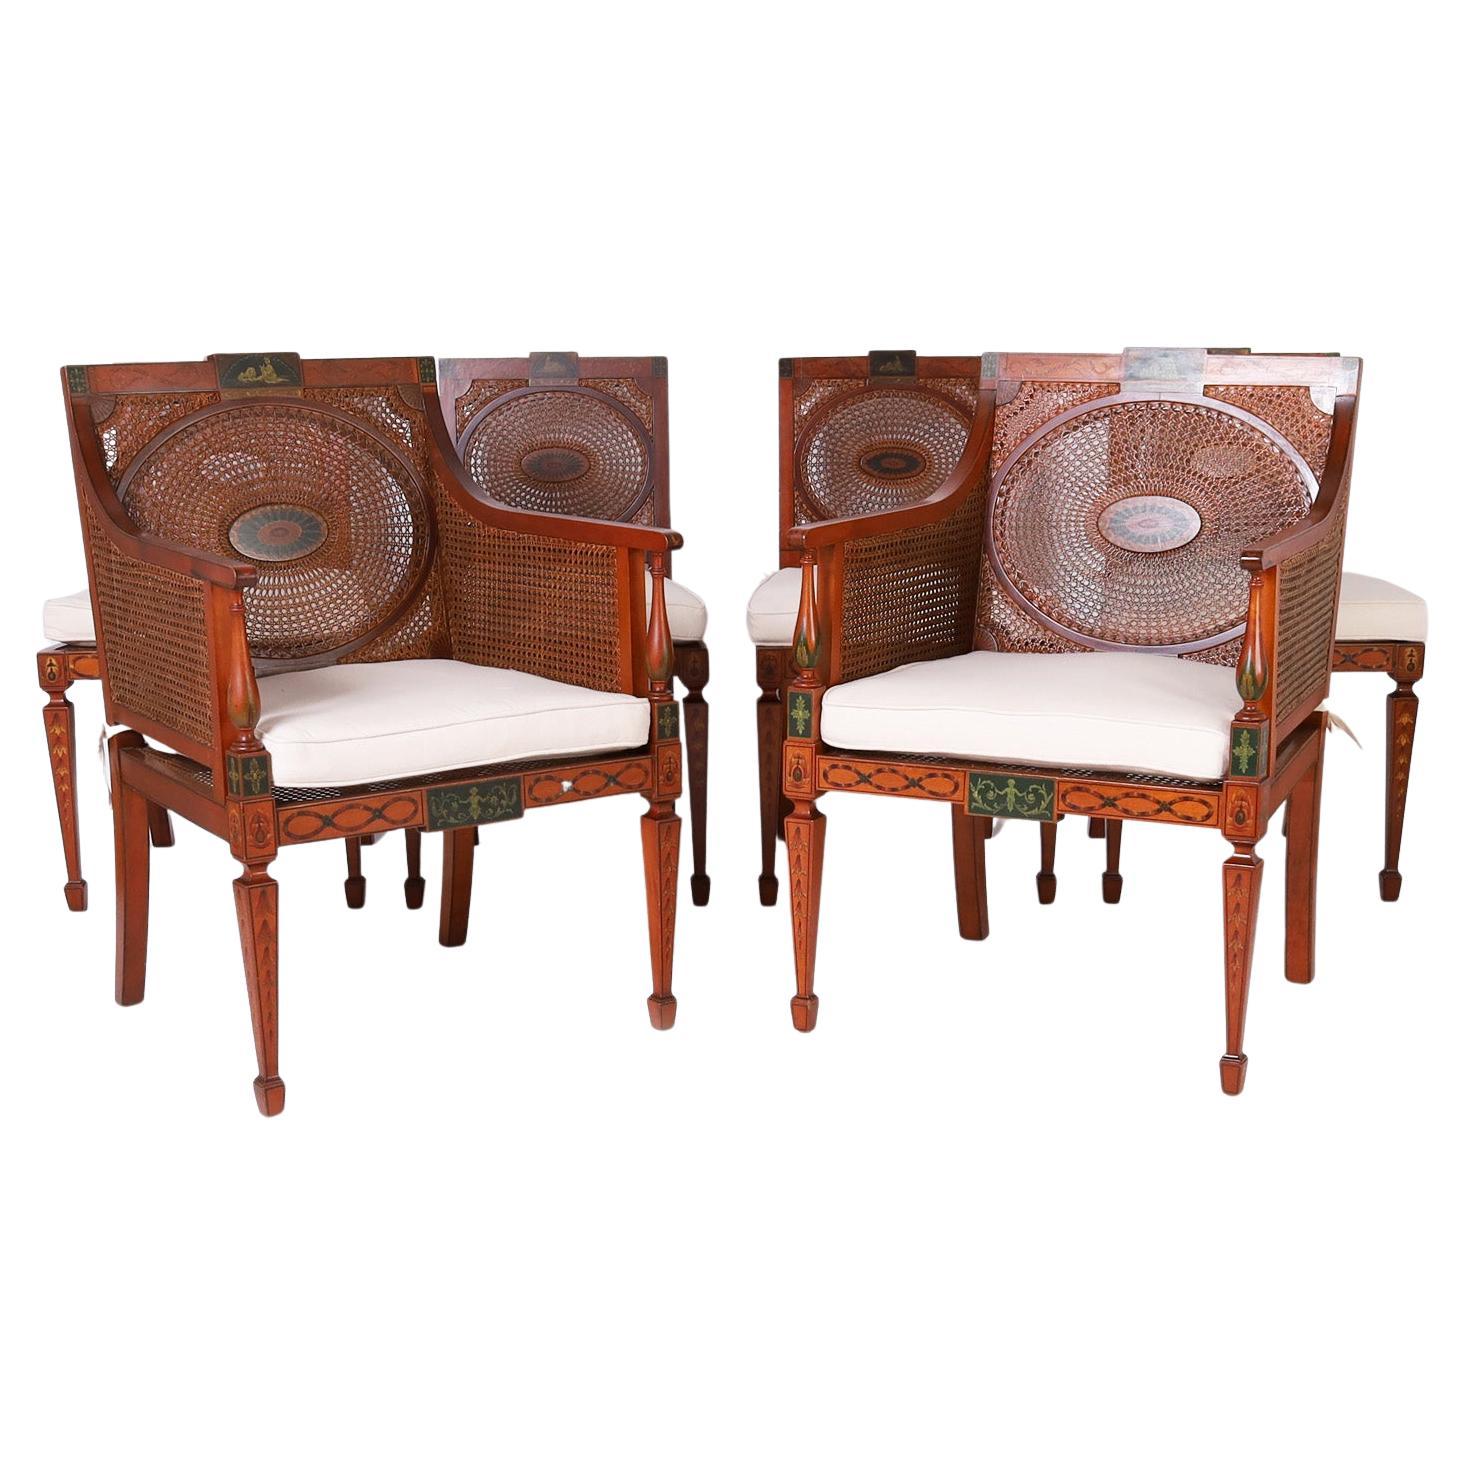 Six Neoclassic Caned and Decorated Adam Style Dining Chairs